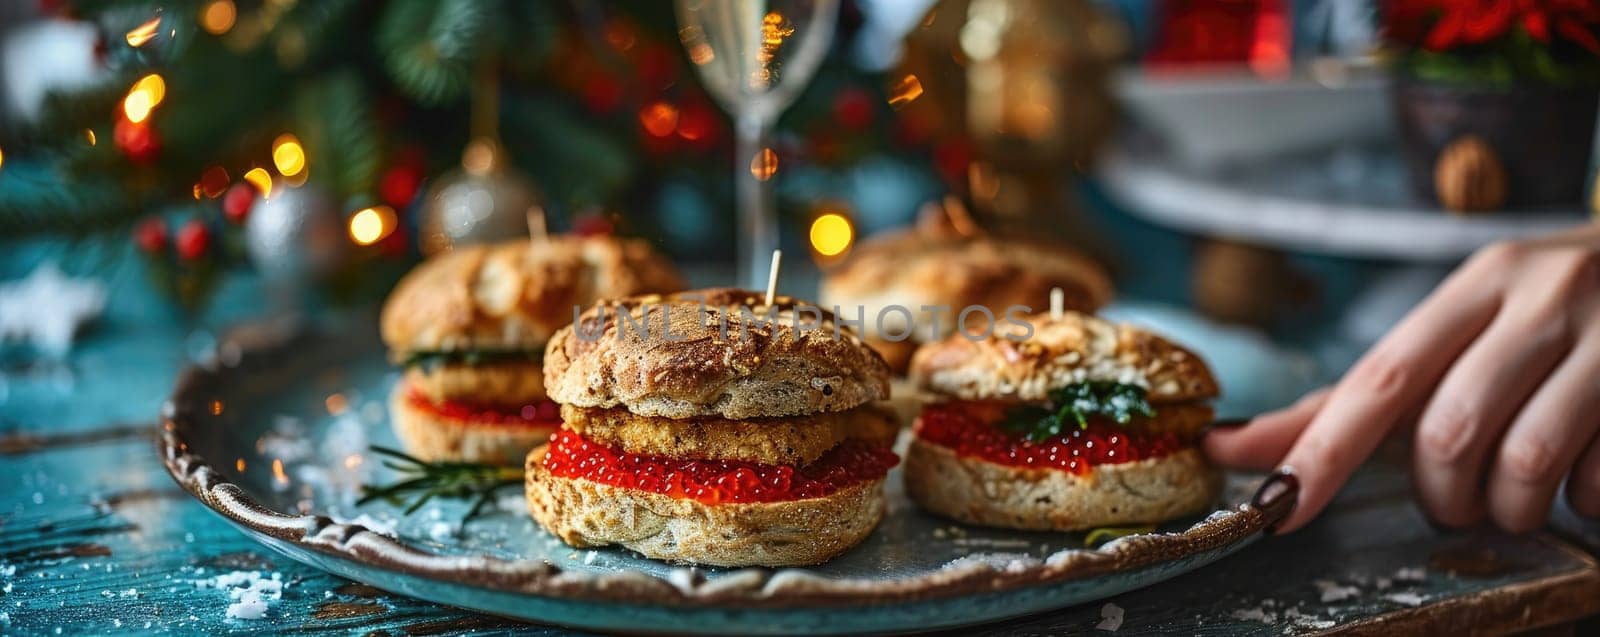 Sumptuous burgers with tender red caviar and juicy meat, the perfect treat for a special occasion